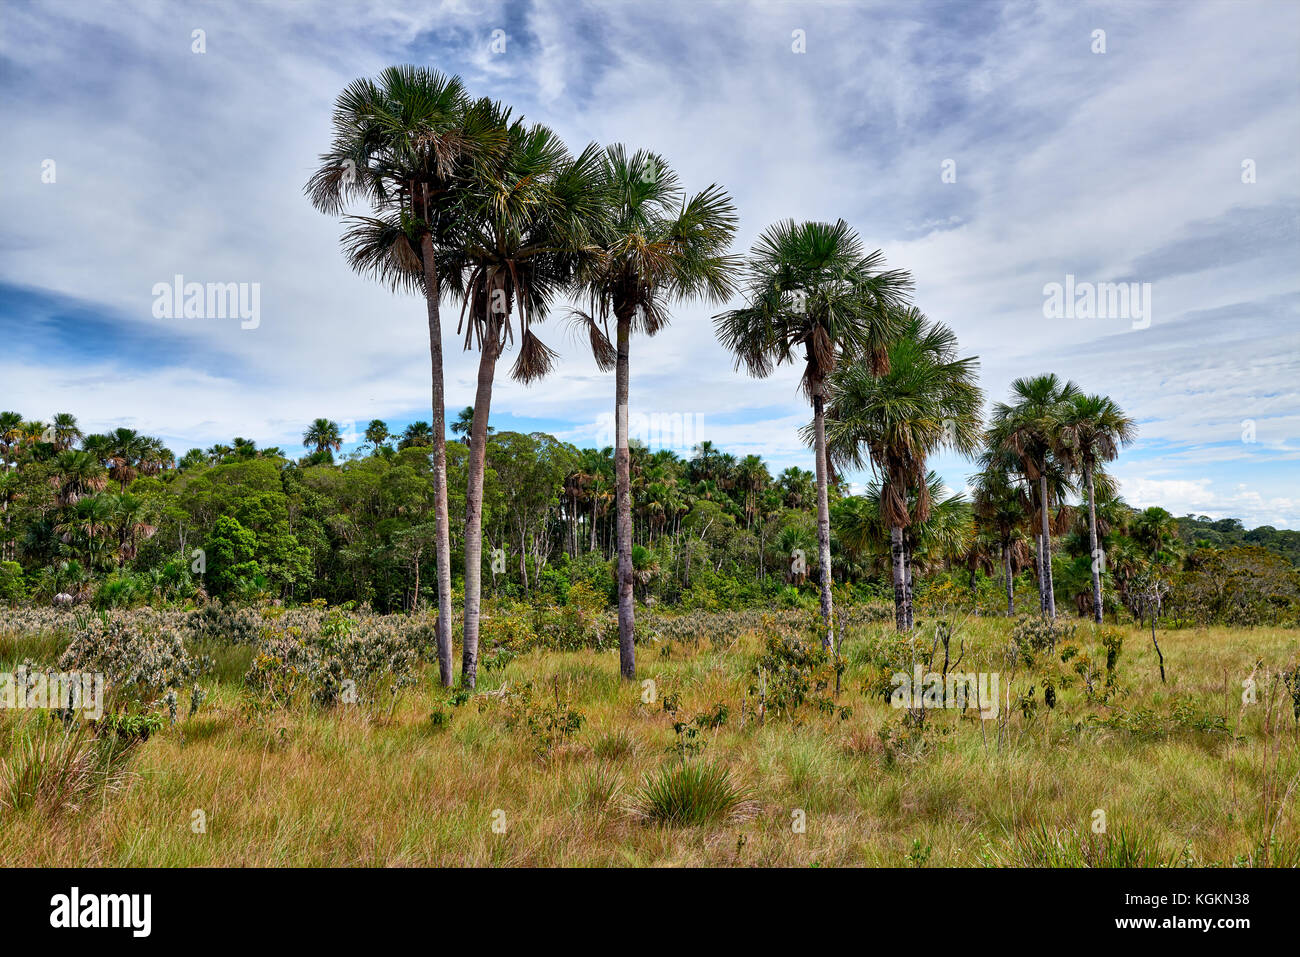 typical landscape with palm trees and plants in National Park Serrania de la Macarena, La Macarena, Colombia, South America Stock Photo